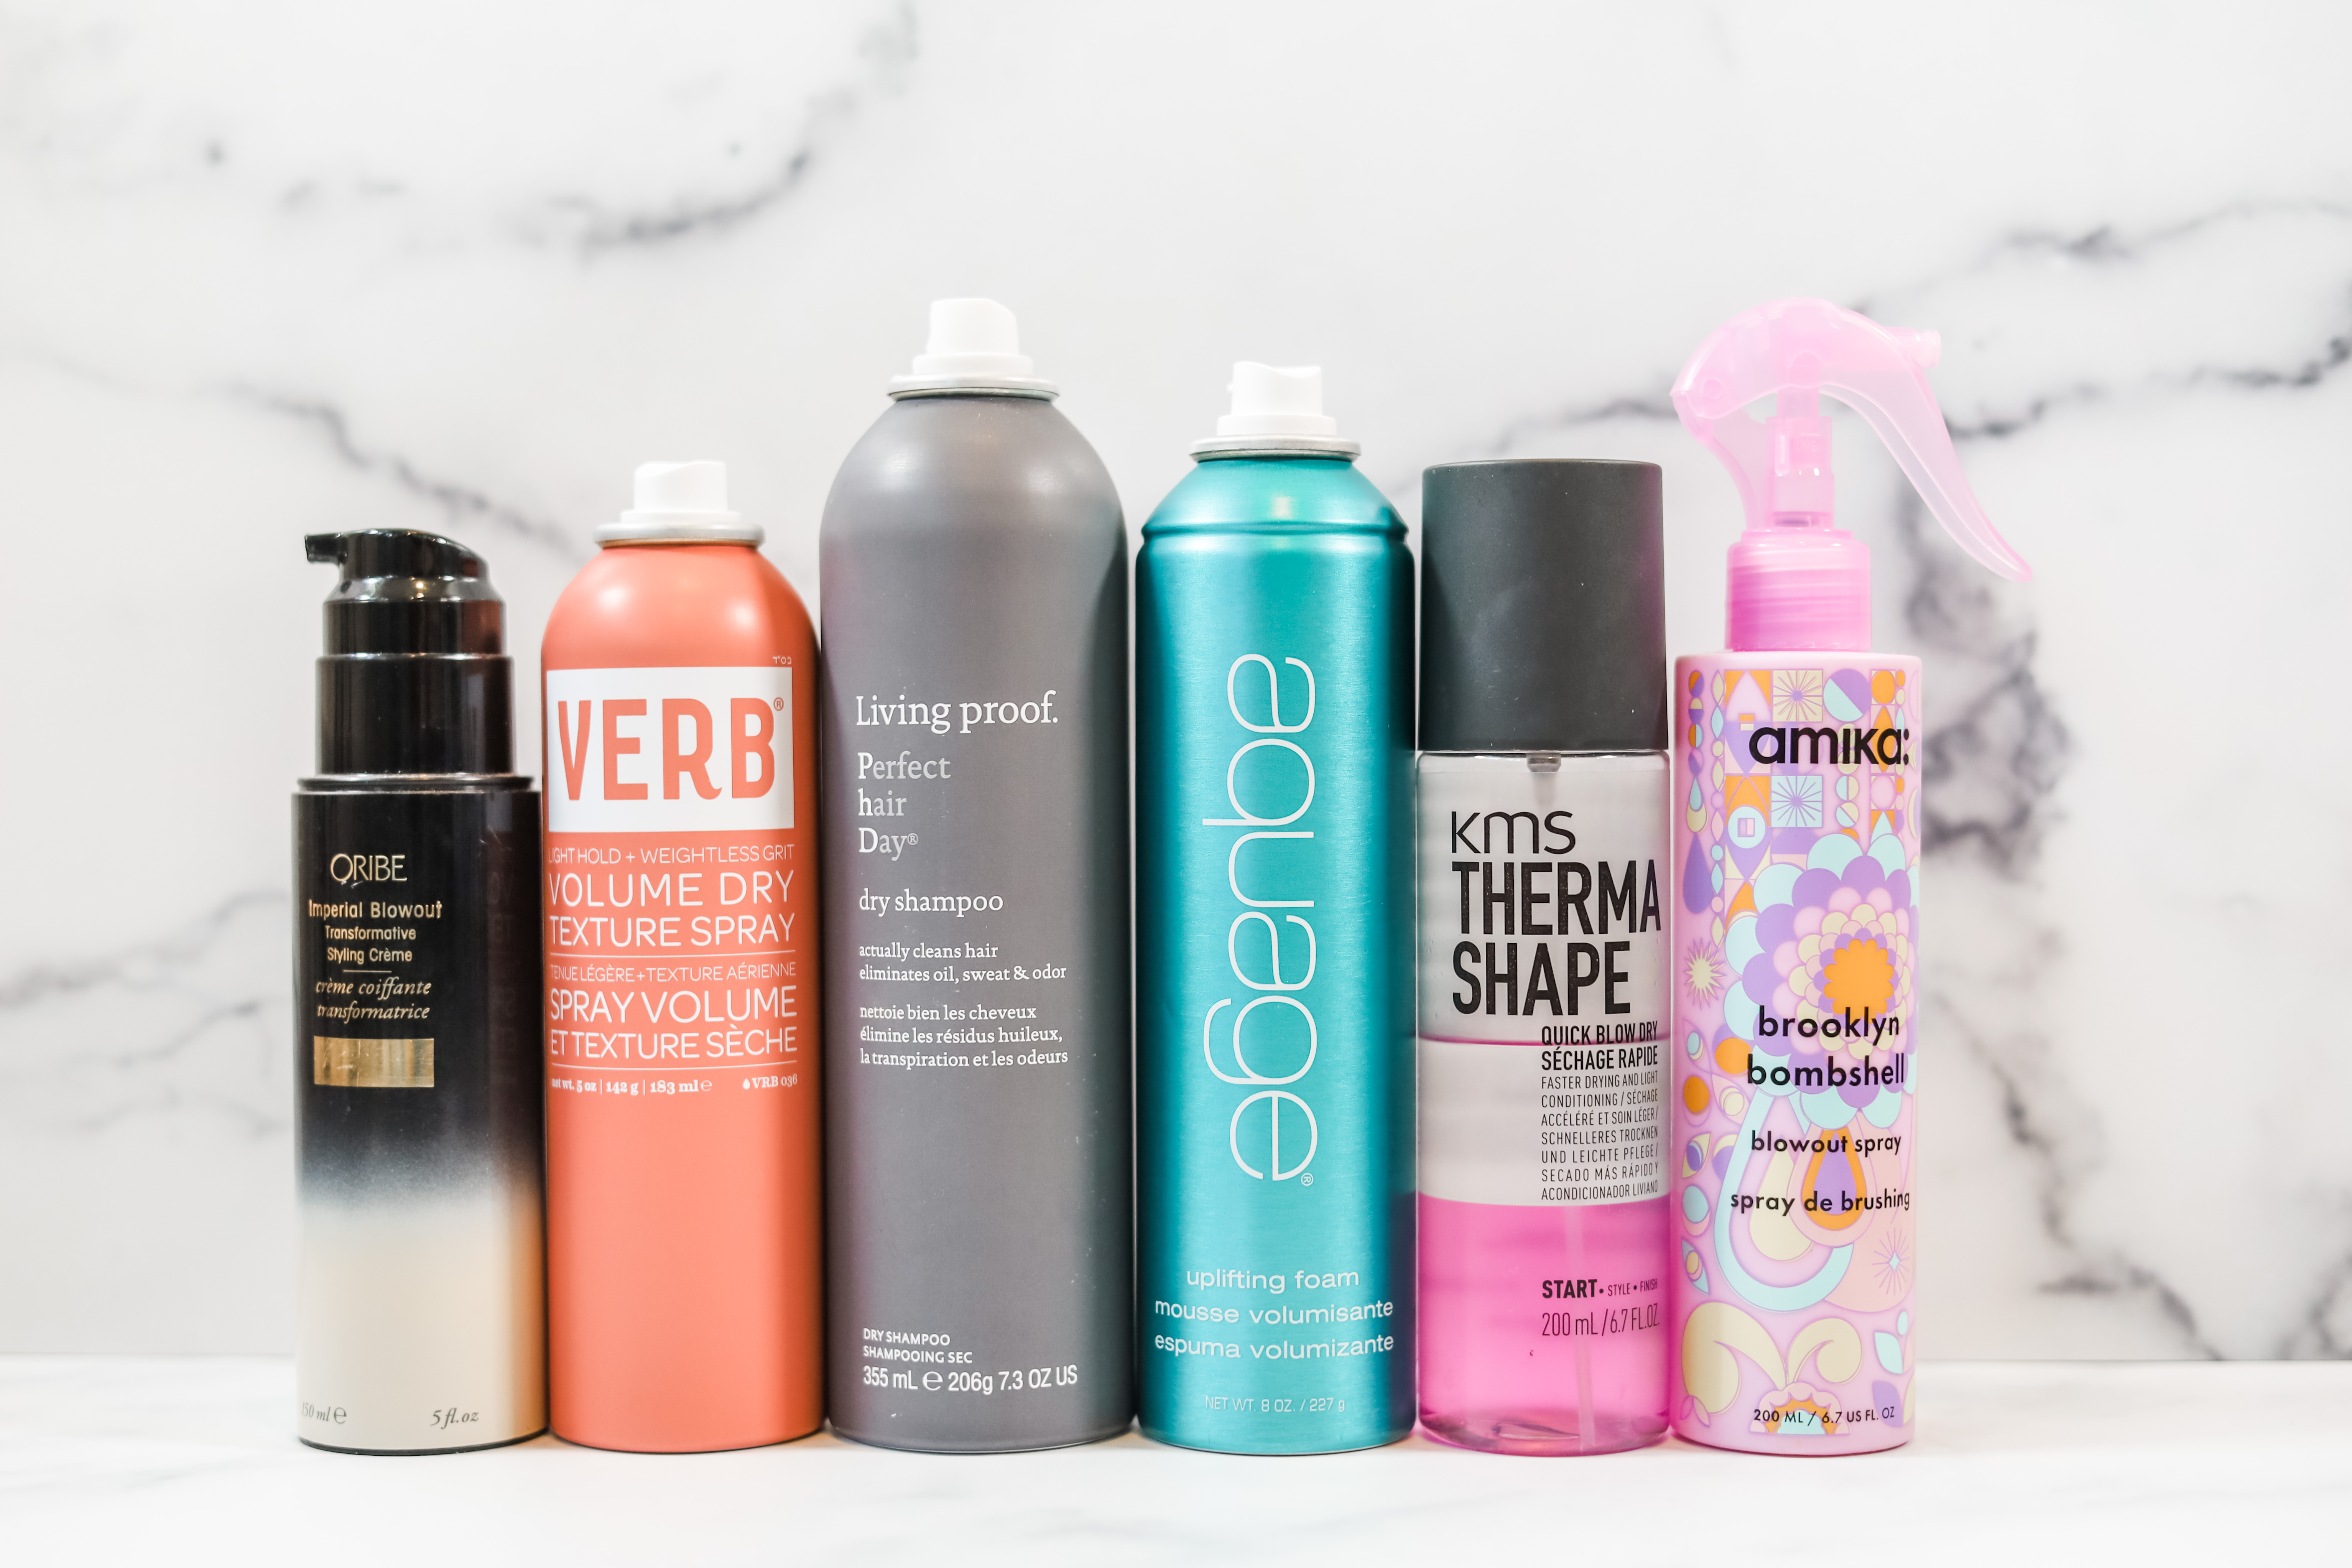 Hair products I always repurchase